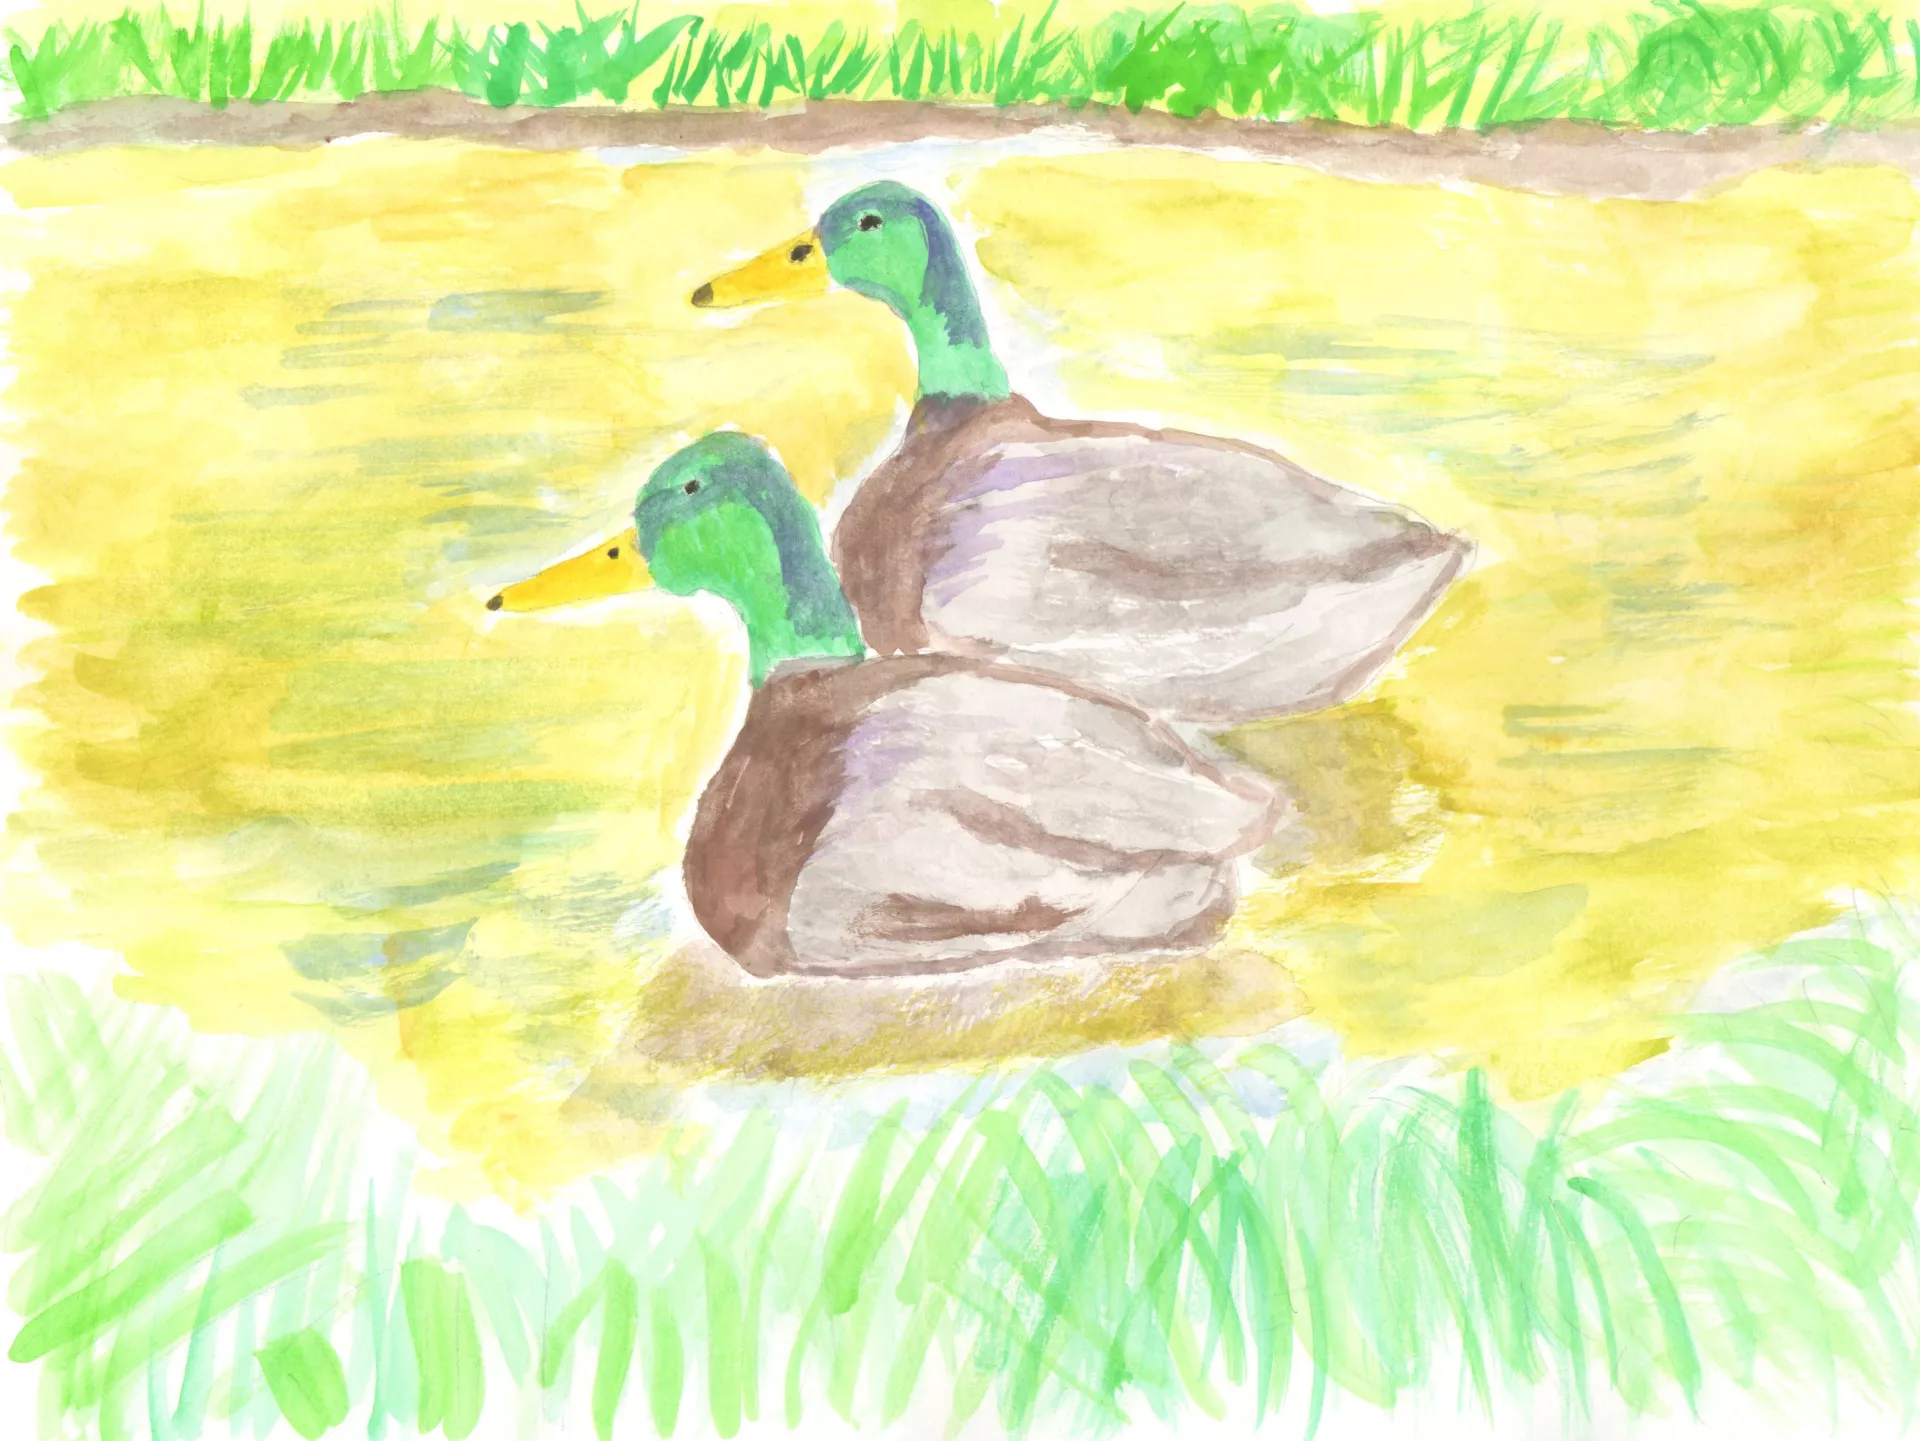 Andrew Yin Ducks in the Pond, 2022. Two ducks swimming side by side in a pond surrounded by vegetation. Watercolor on paper, 9" x 12”